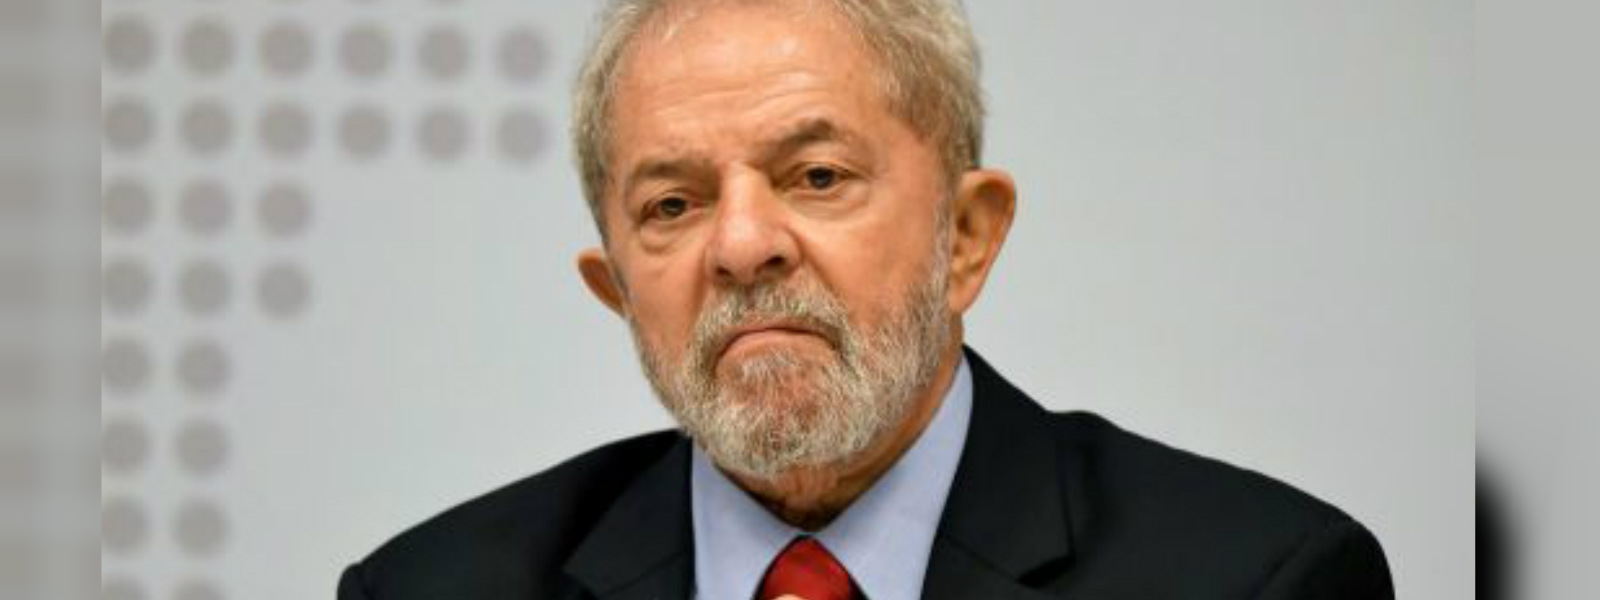 Supporters of ex-president Lula demand his release